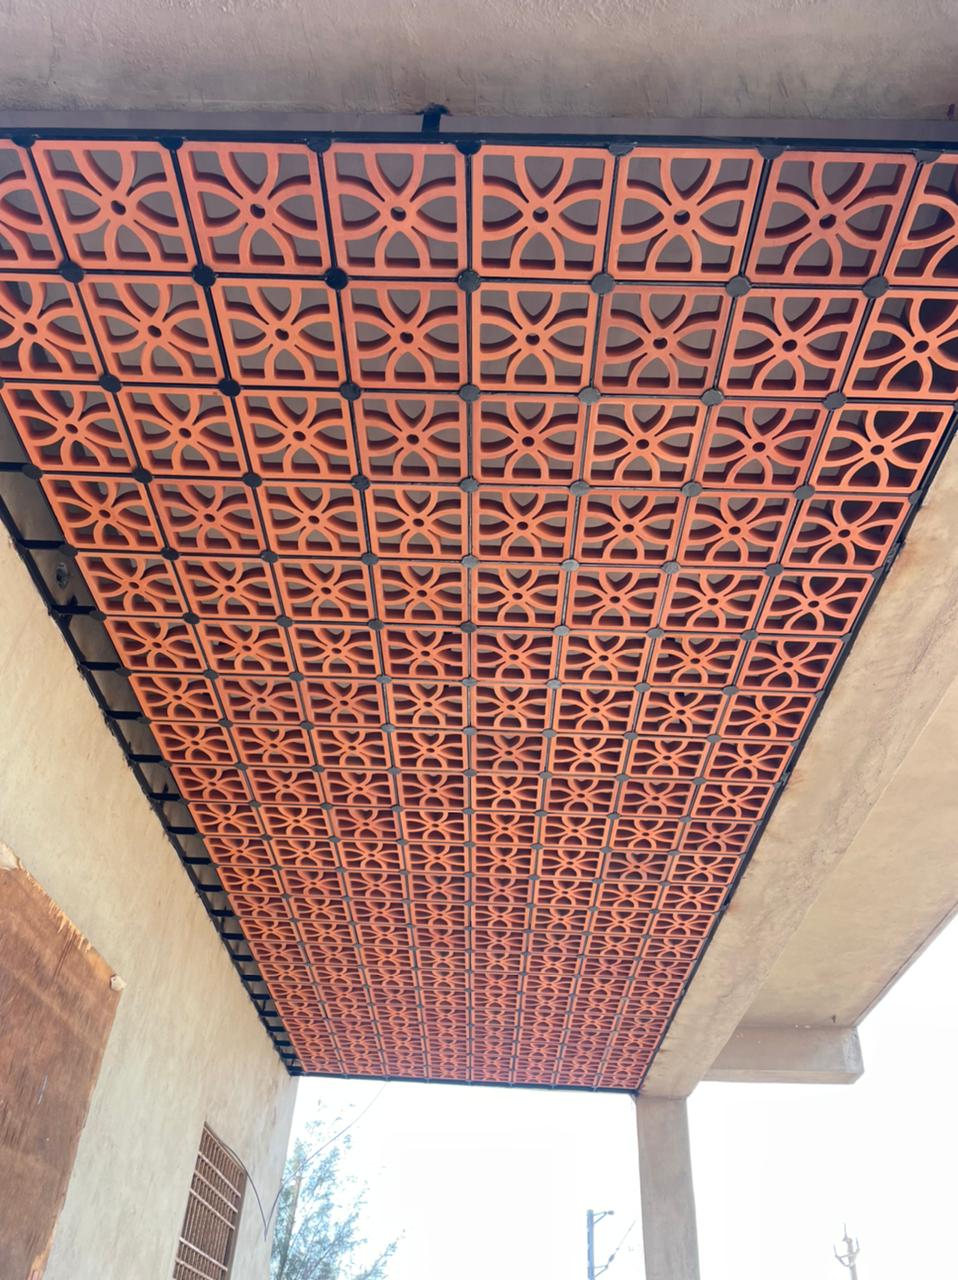 Terracotta Clay Jali Partition Wall Cladding Facade  in Hyderabad Telangana